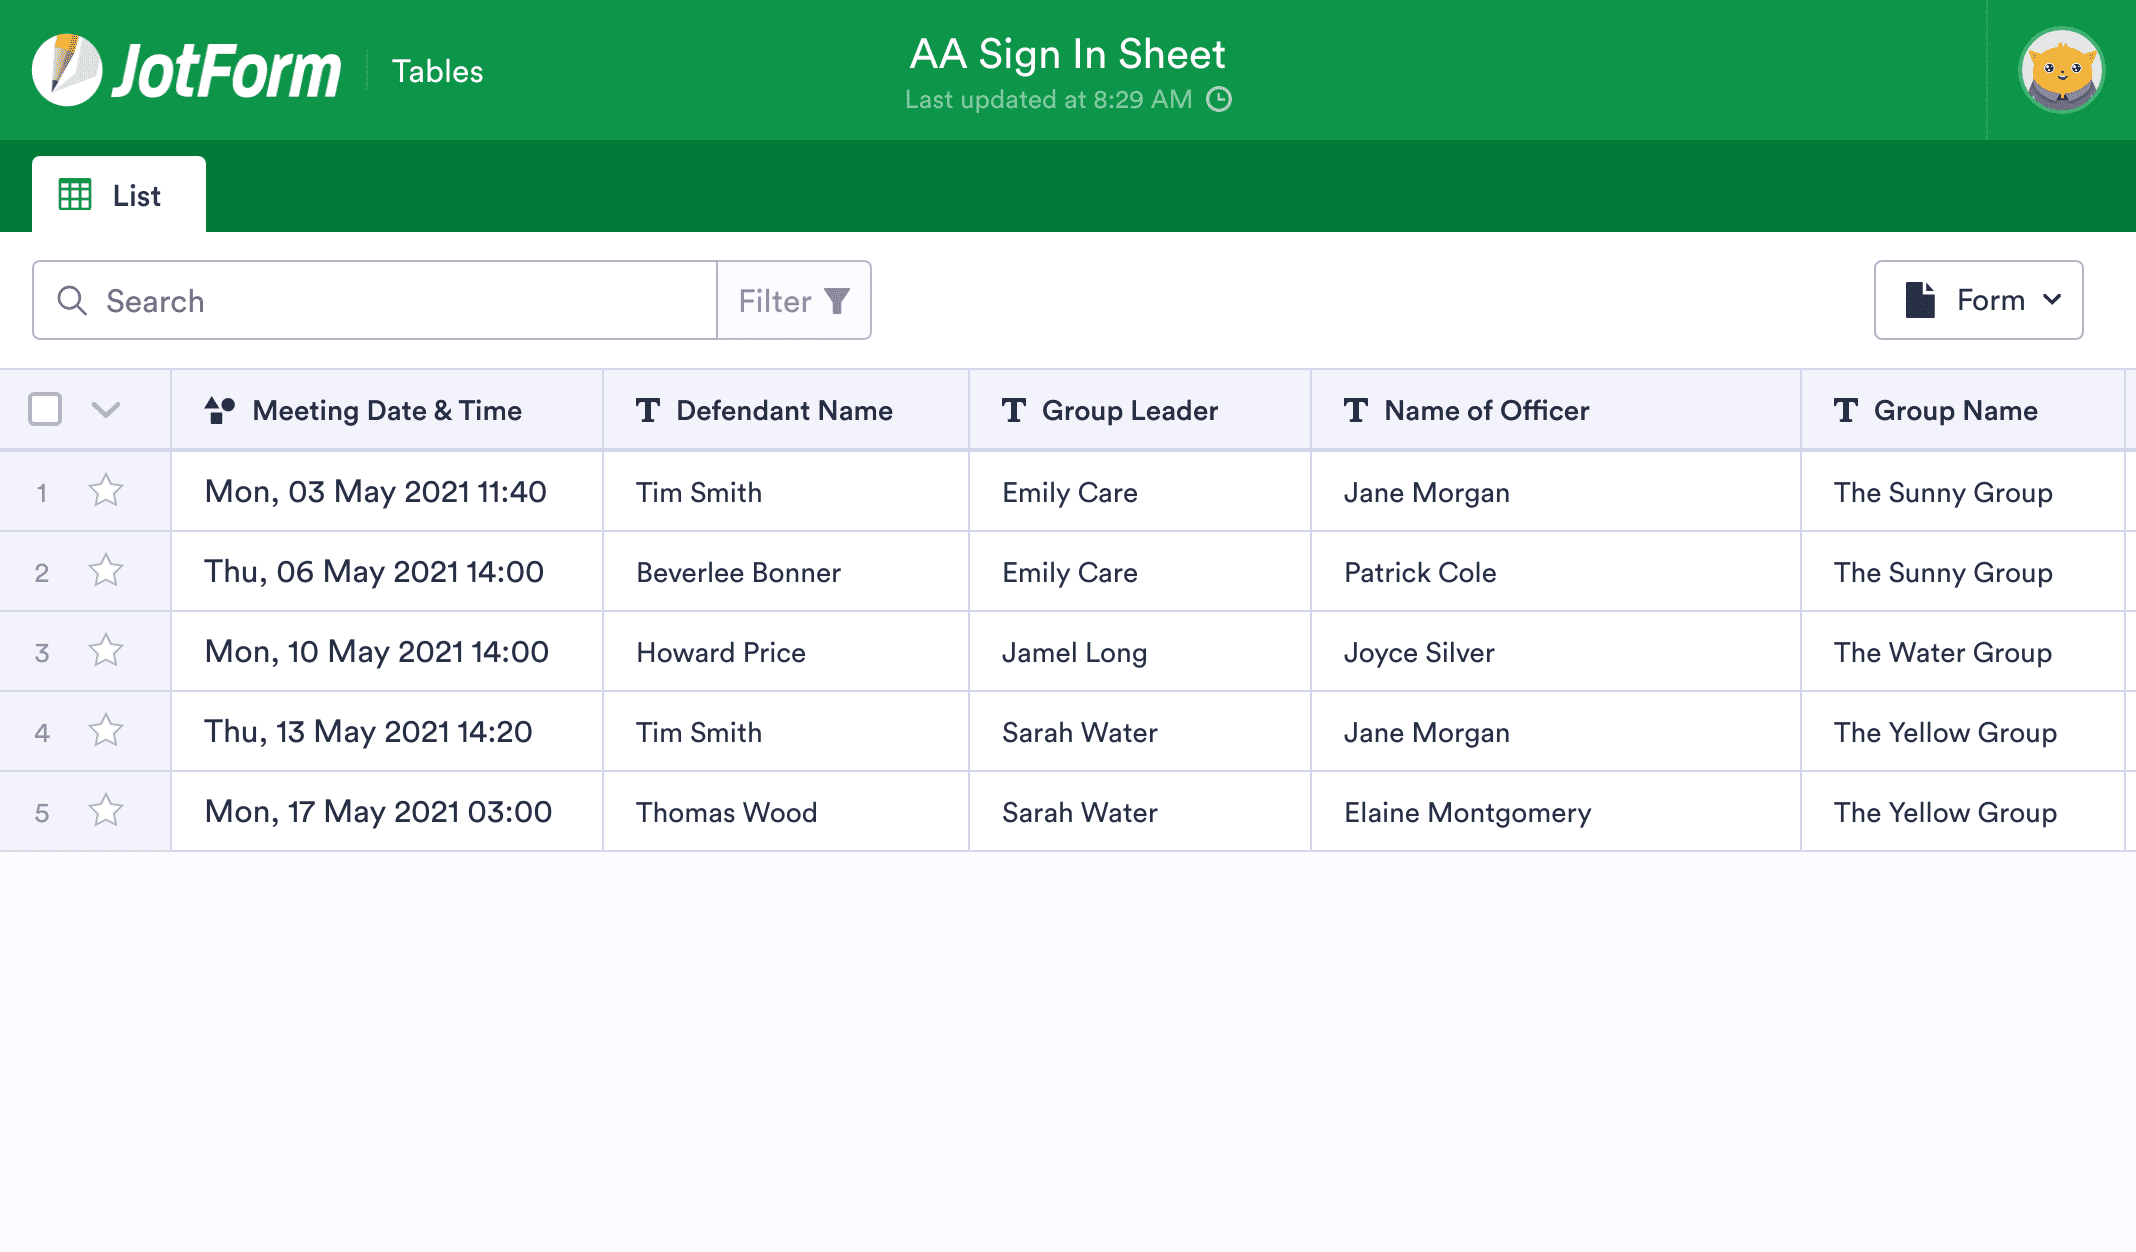 aa-sign-in-sheet-template-jotform-tables